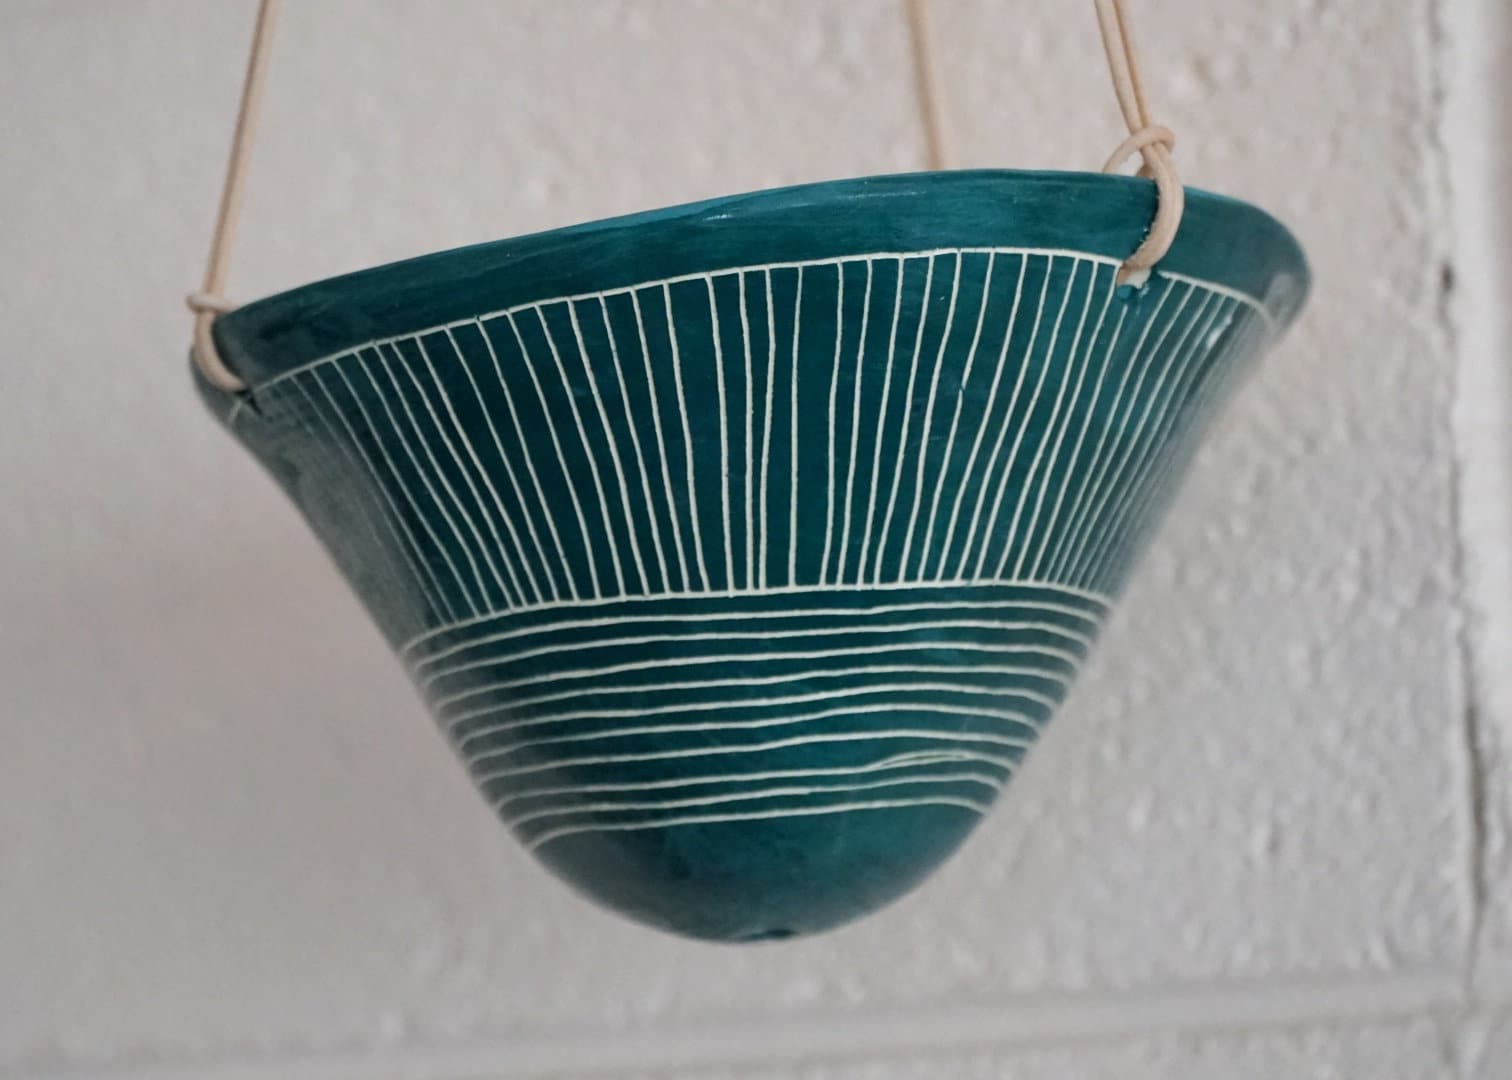 Teal Green & White Hanging Planter w/ "Directional Line" Design - Glazed - Hanging Pot - Succulent, Cactus, Herb, Air Plant, Etc